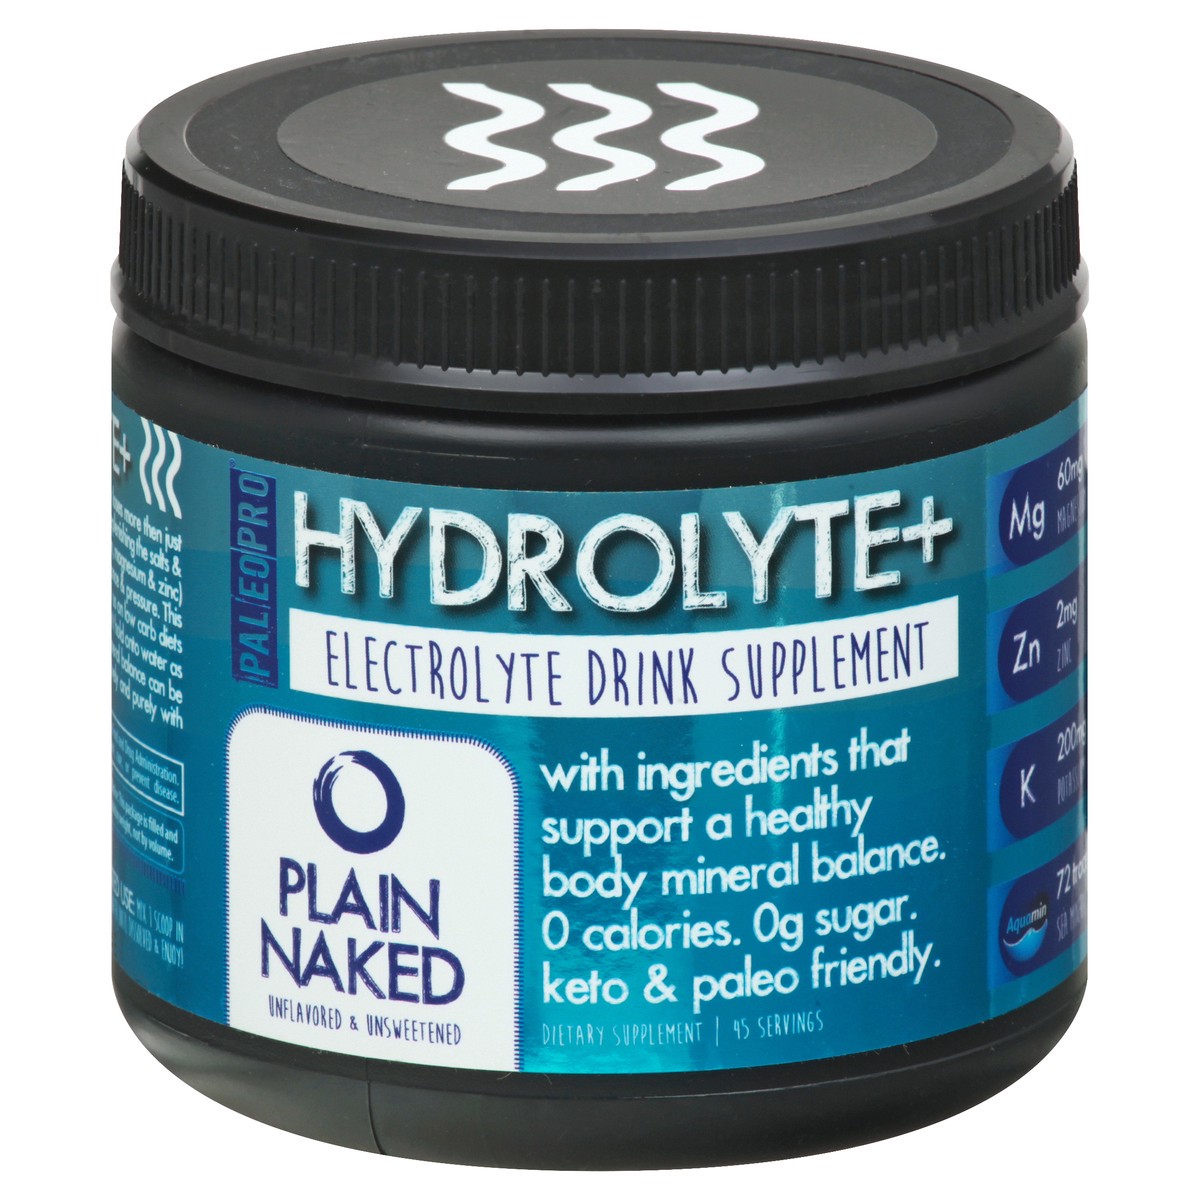 slide 1 of 13, Hydrolyte + Electrolyte Unflavored & Unsweetened Plain Naked Drink Supplement 1 ea, 6.3 oz